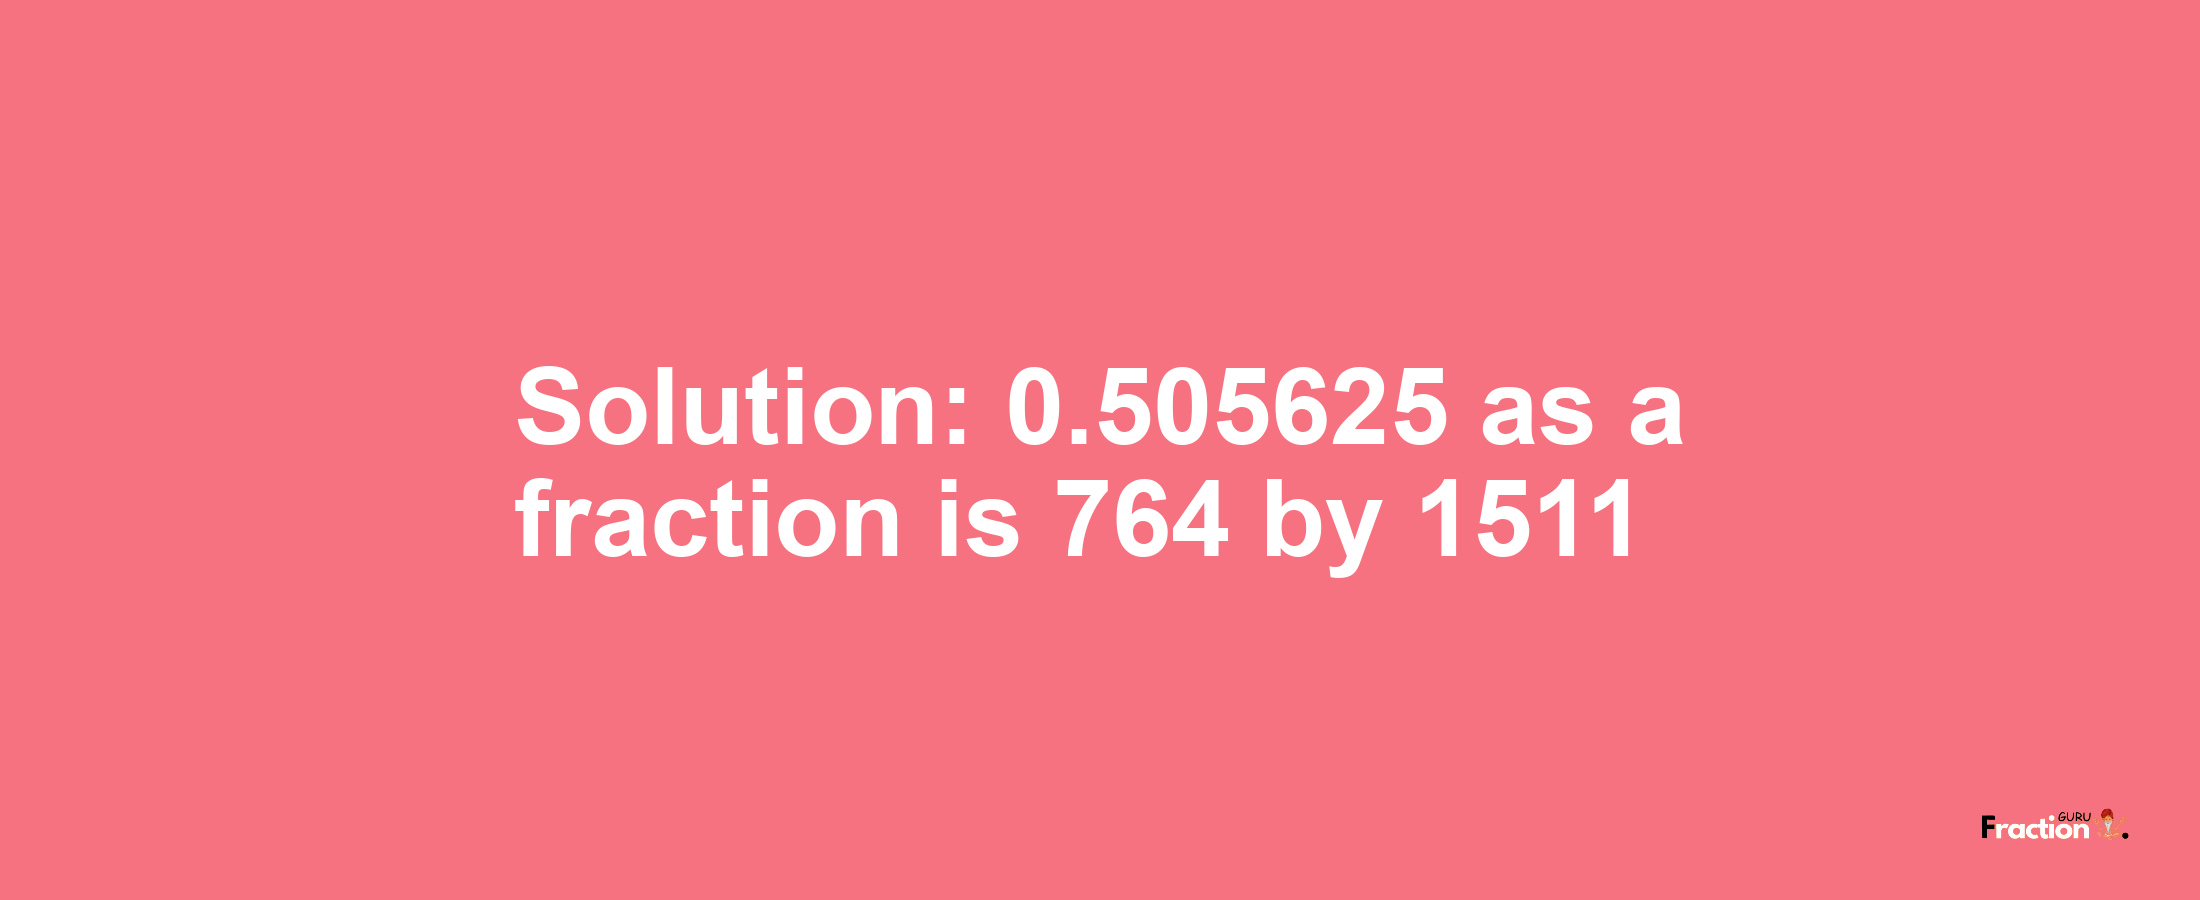 Solution:0.505625 as a fraction is 764/1511